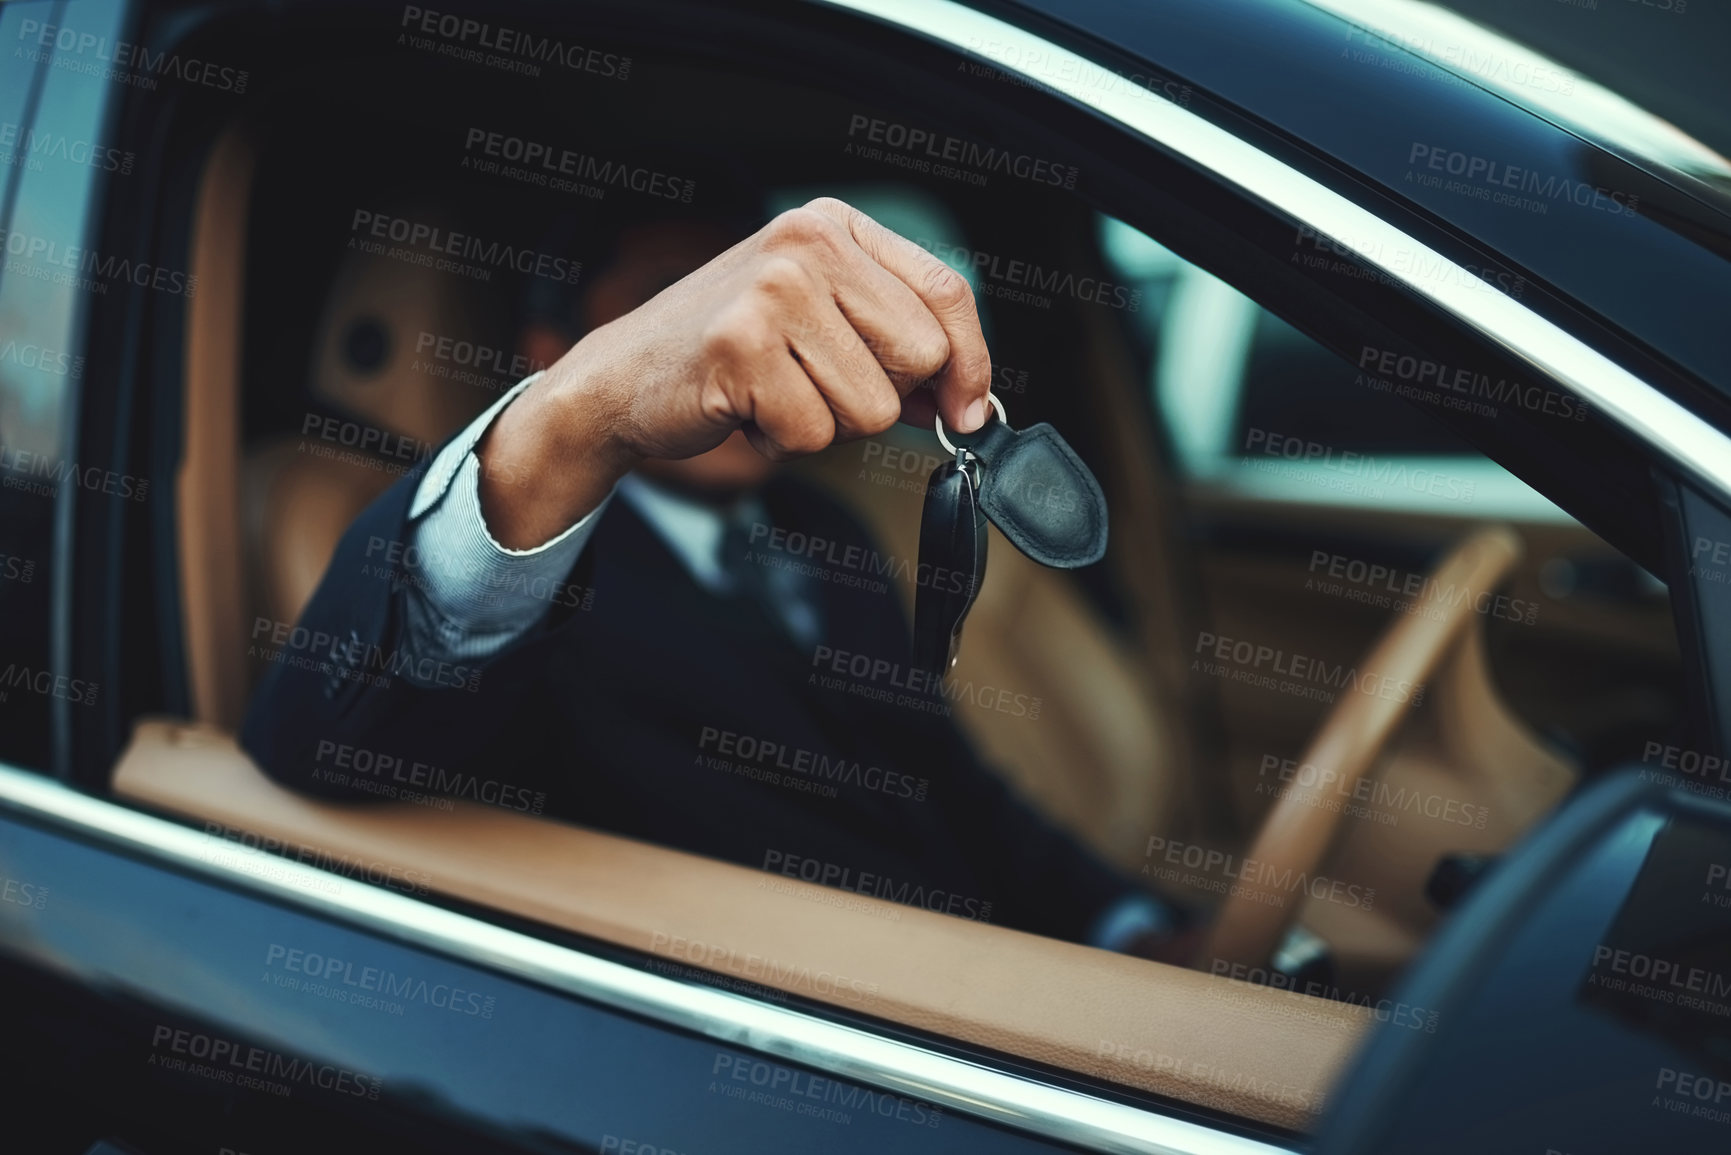 Buy stock photo Shot of a businessman holding the keys to a luxury car